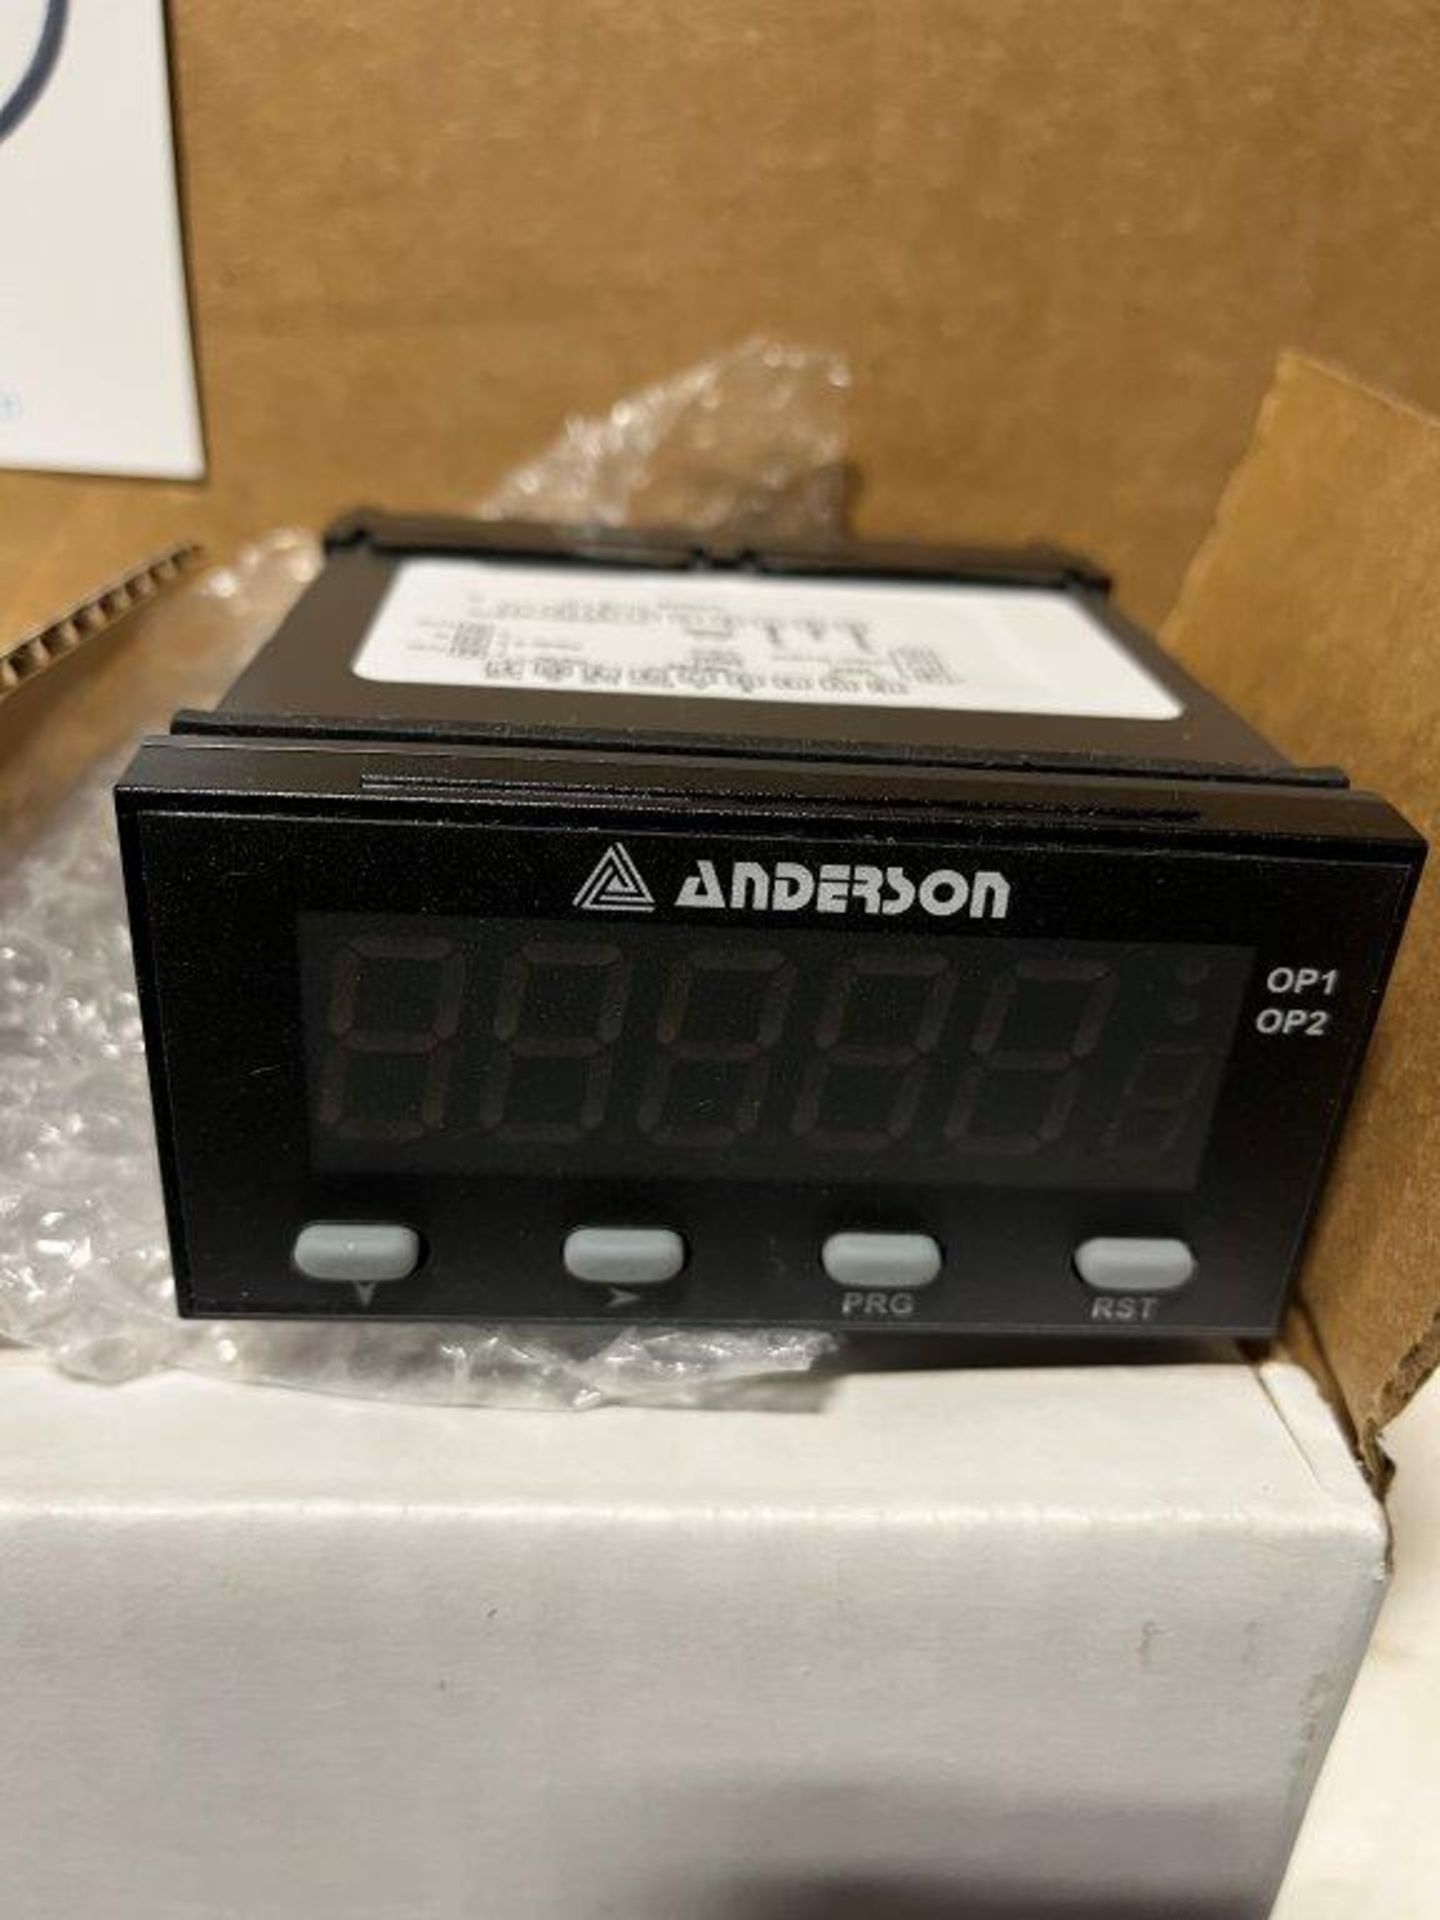 (8) Anderson GKS628-11300 Temperature Controllers - Image 2 of 2